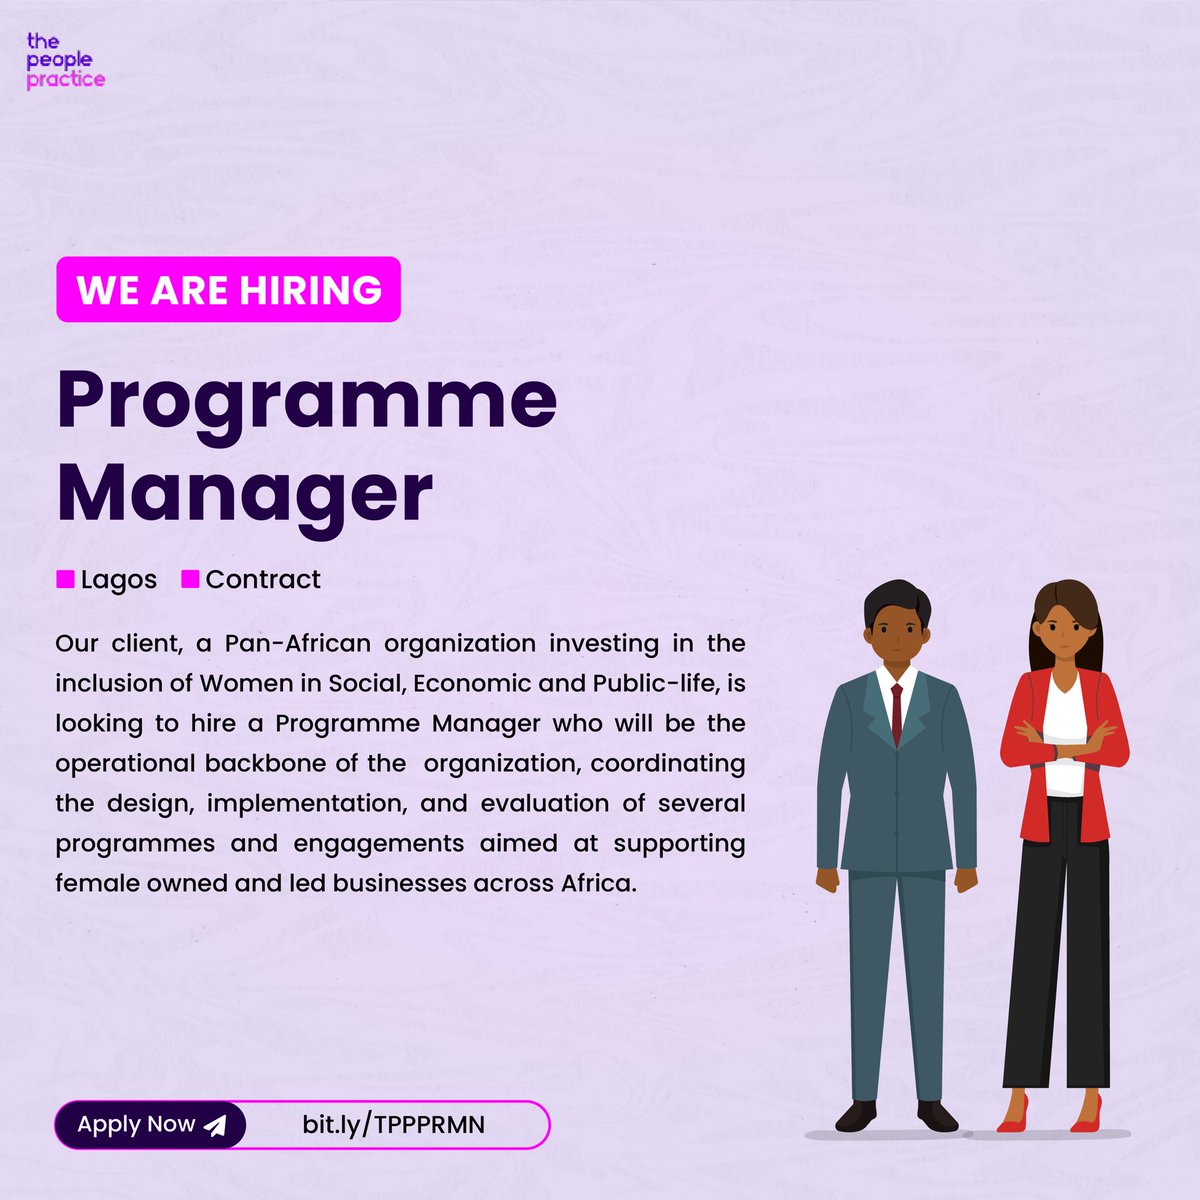 Do you have a degree in Economics, international relations or other related disciplines?

Do you have experience in operations and project planning with a diverse team in fast-paced environments?

Yes? Please apply here;
bit.ly/TPPPRMN

#programmemanager